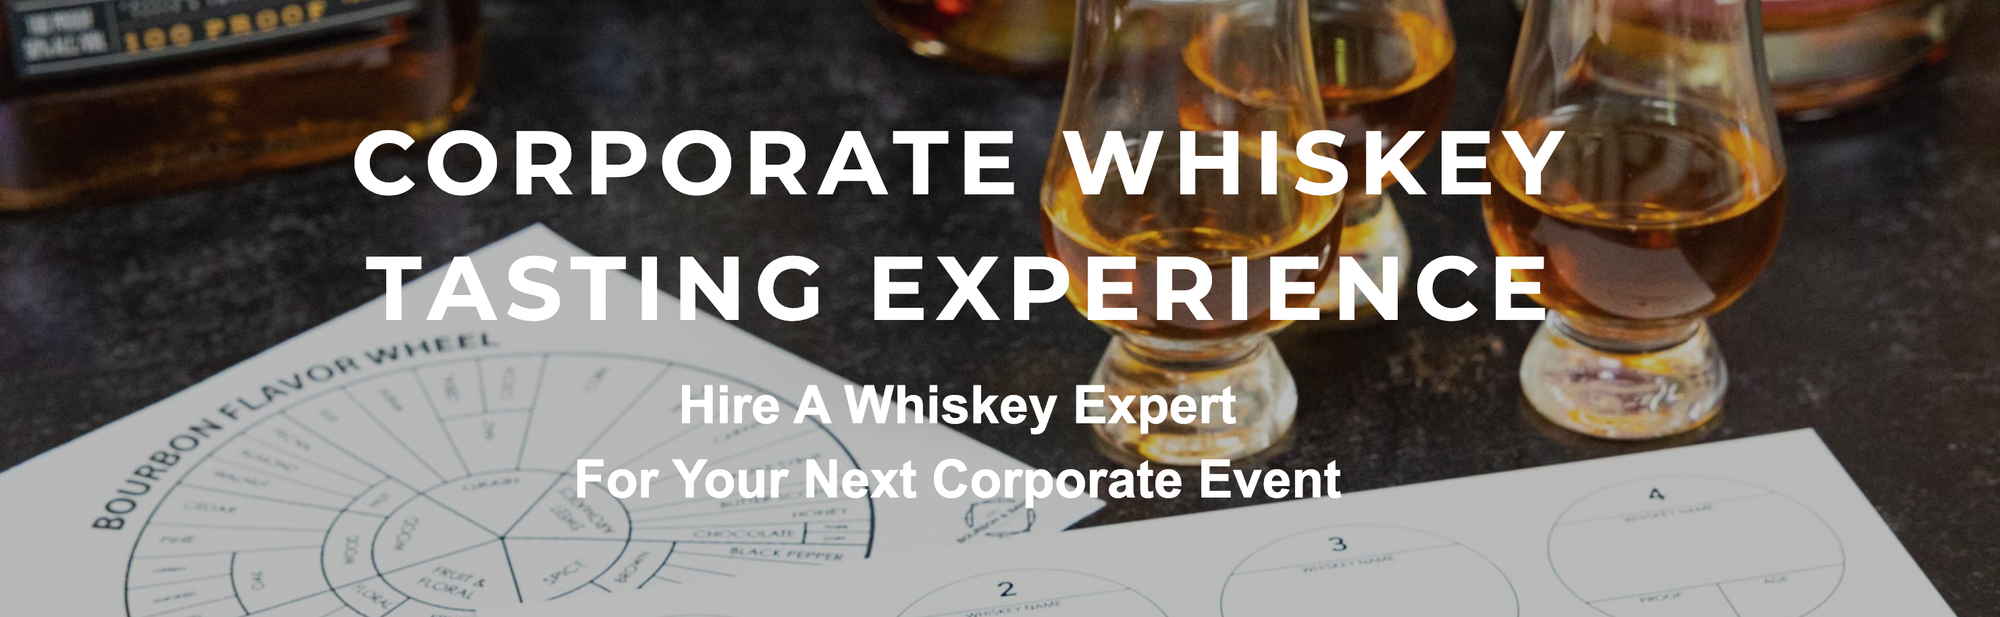 Corporate Whiskey Tasting Experience